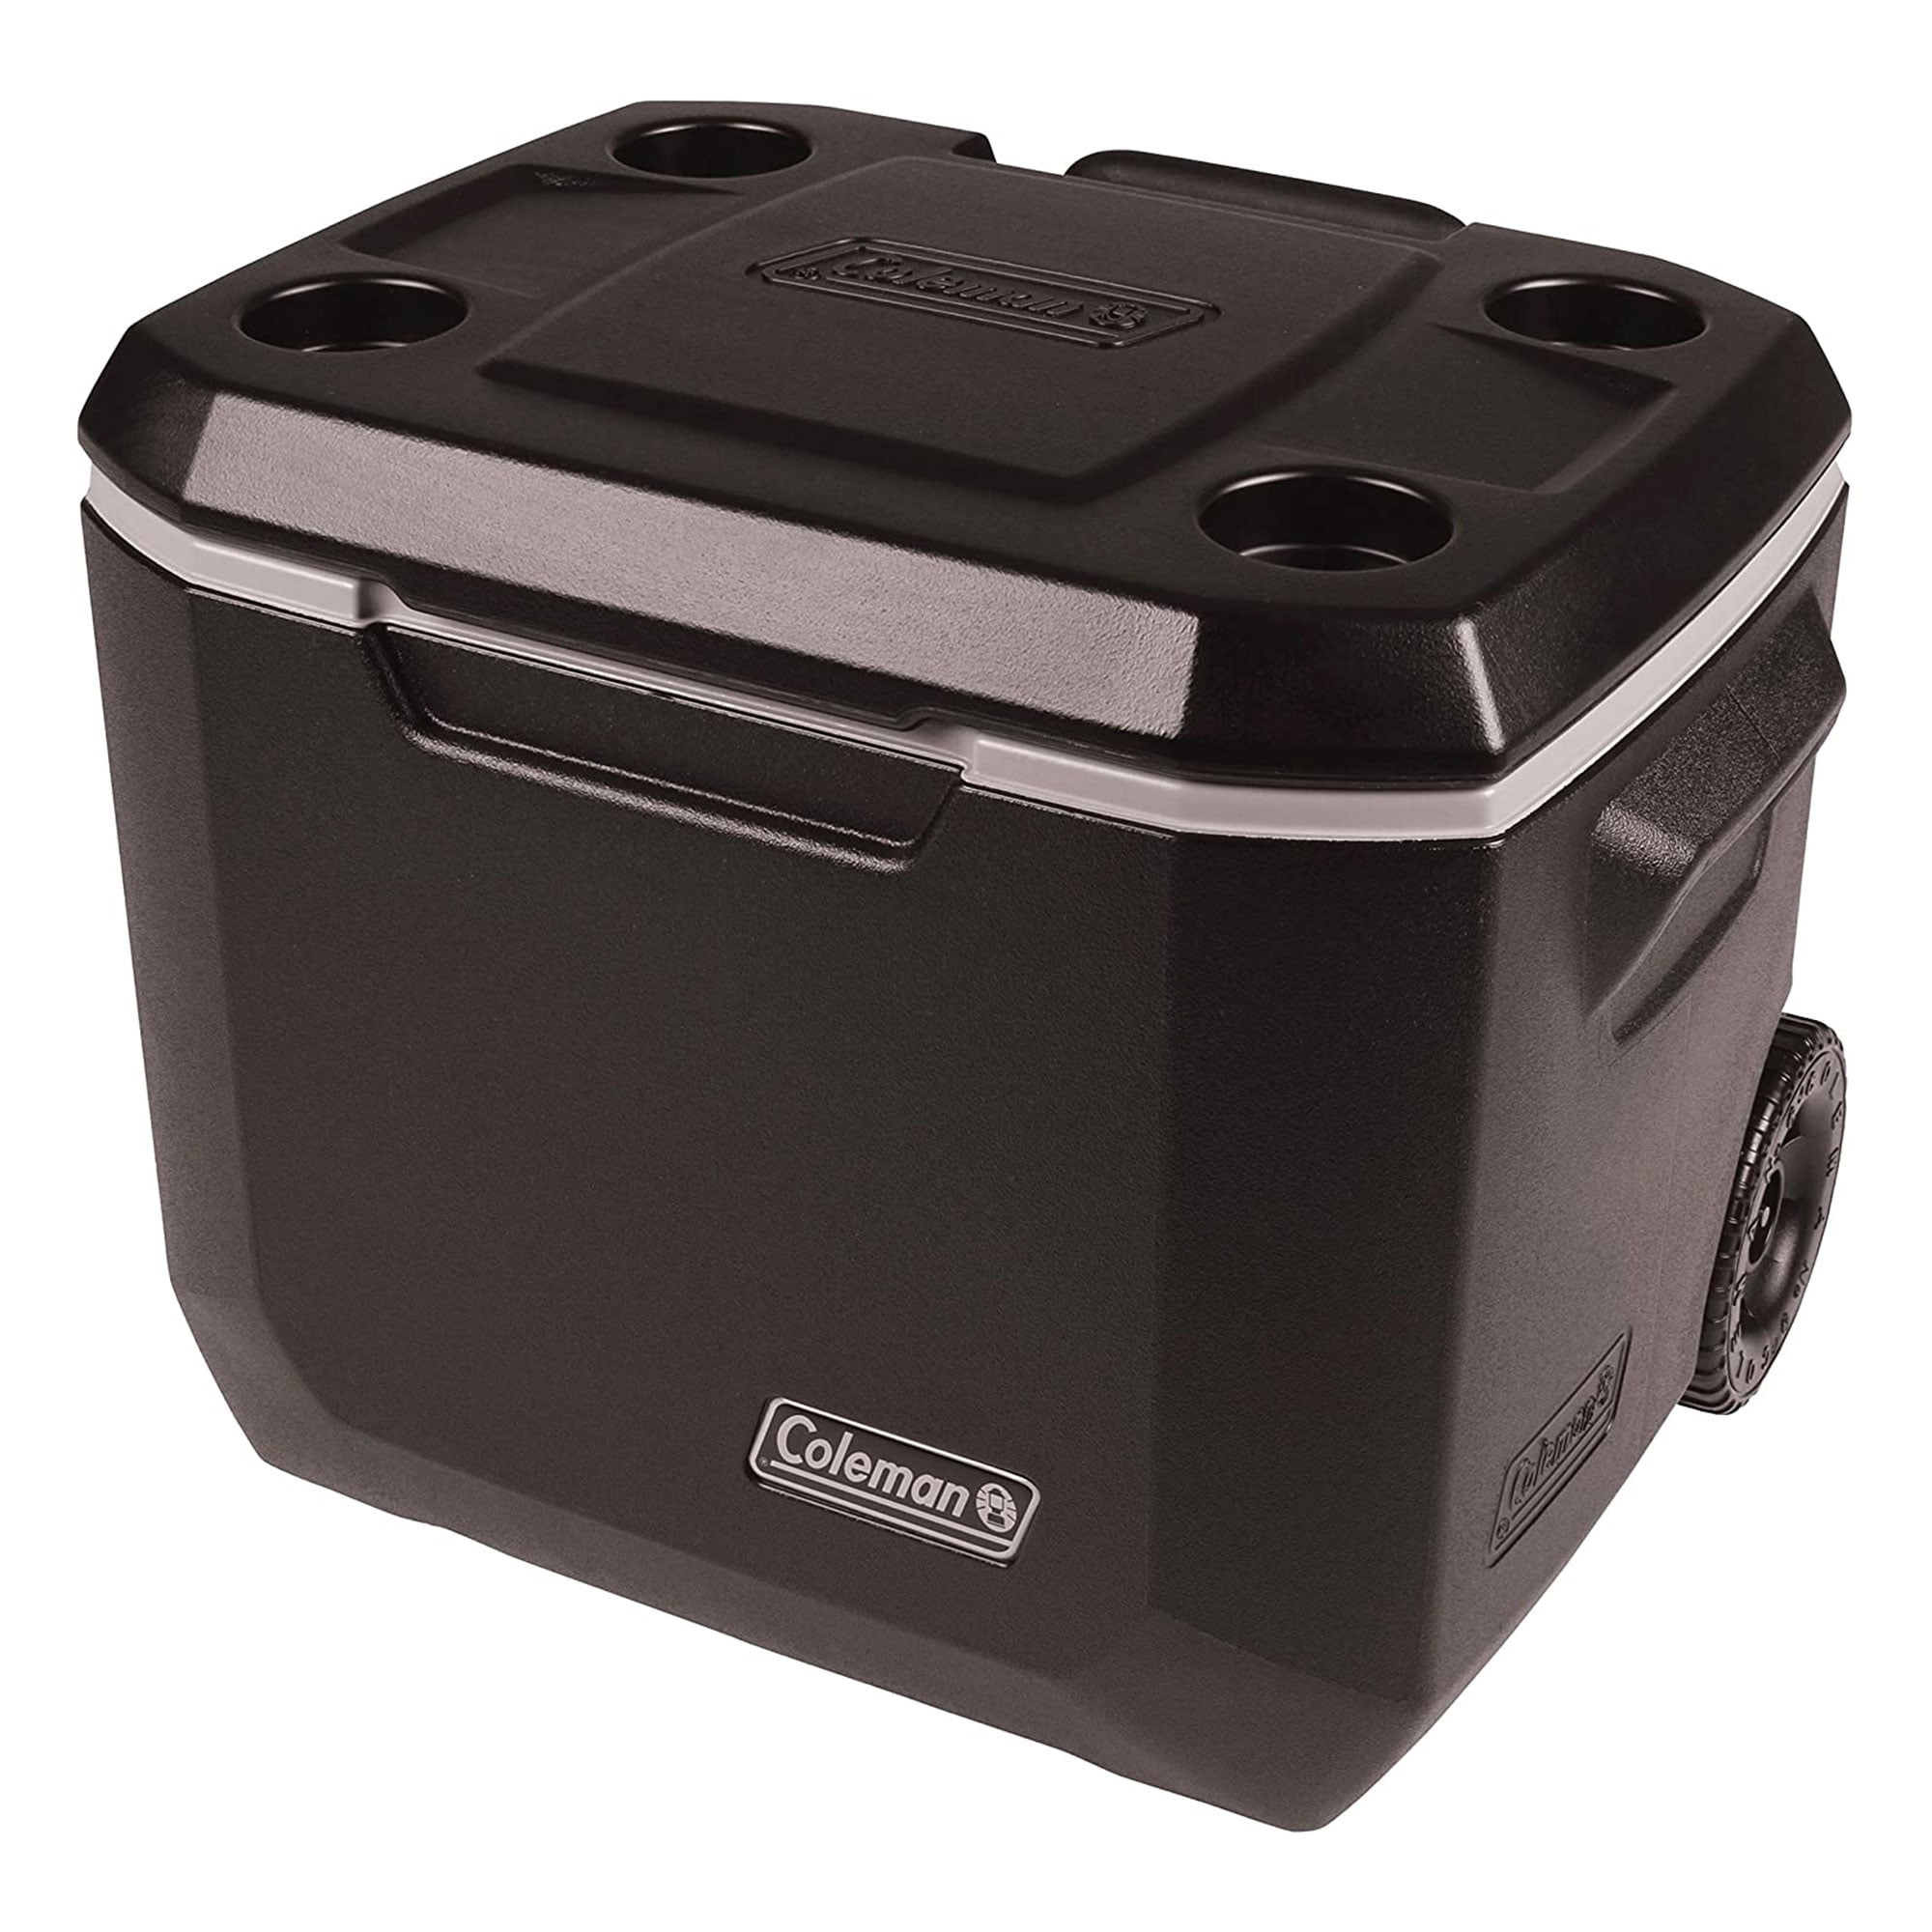 Slate NEW FREESHIP Coleman 50-Quart Xtreme 5-Day Hard Cooler with Wheels 